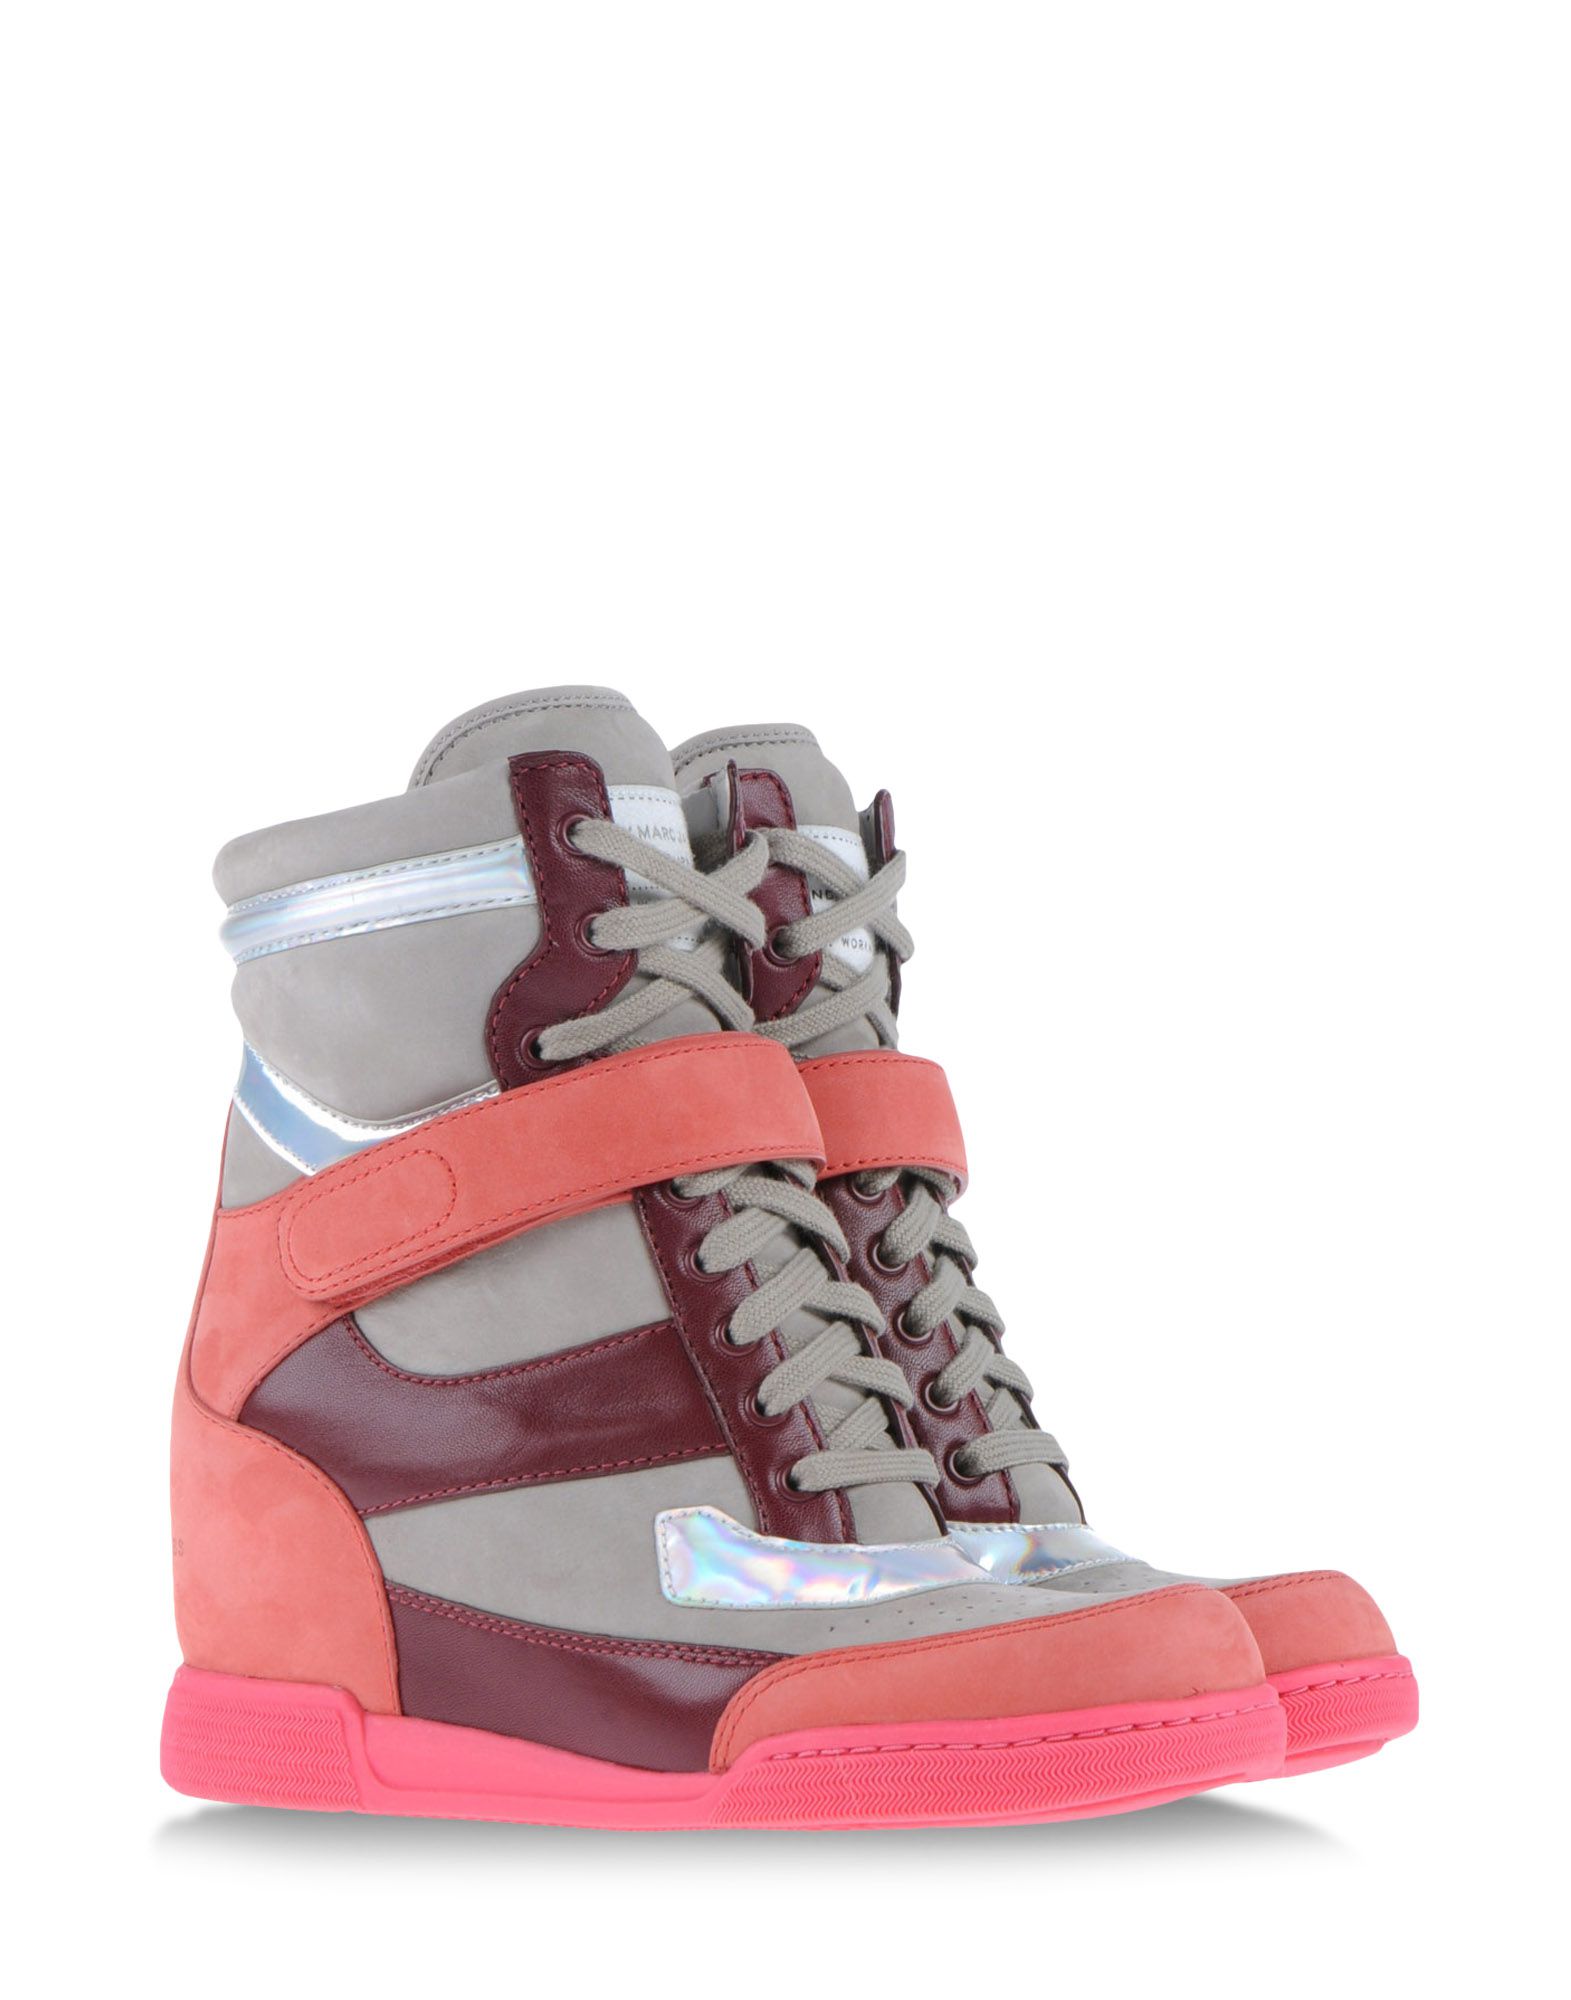 Marc by marc jacobs Wedge Trainer in Pink | Lyst